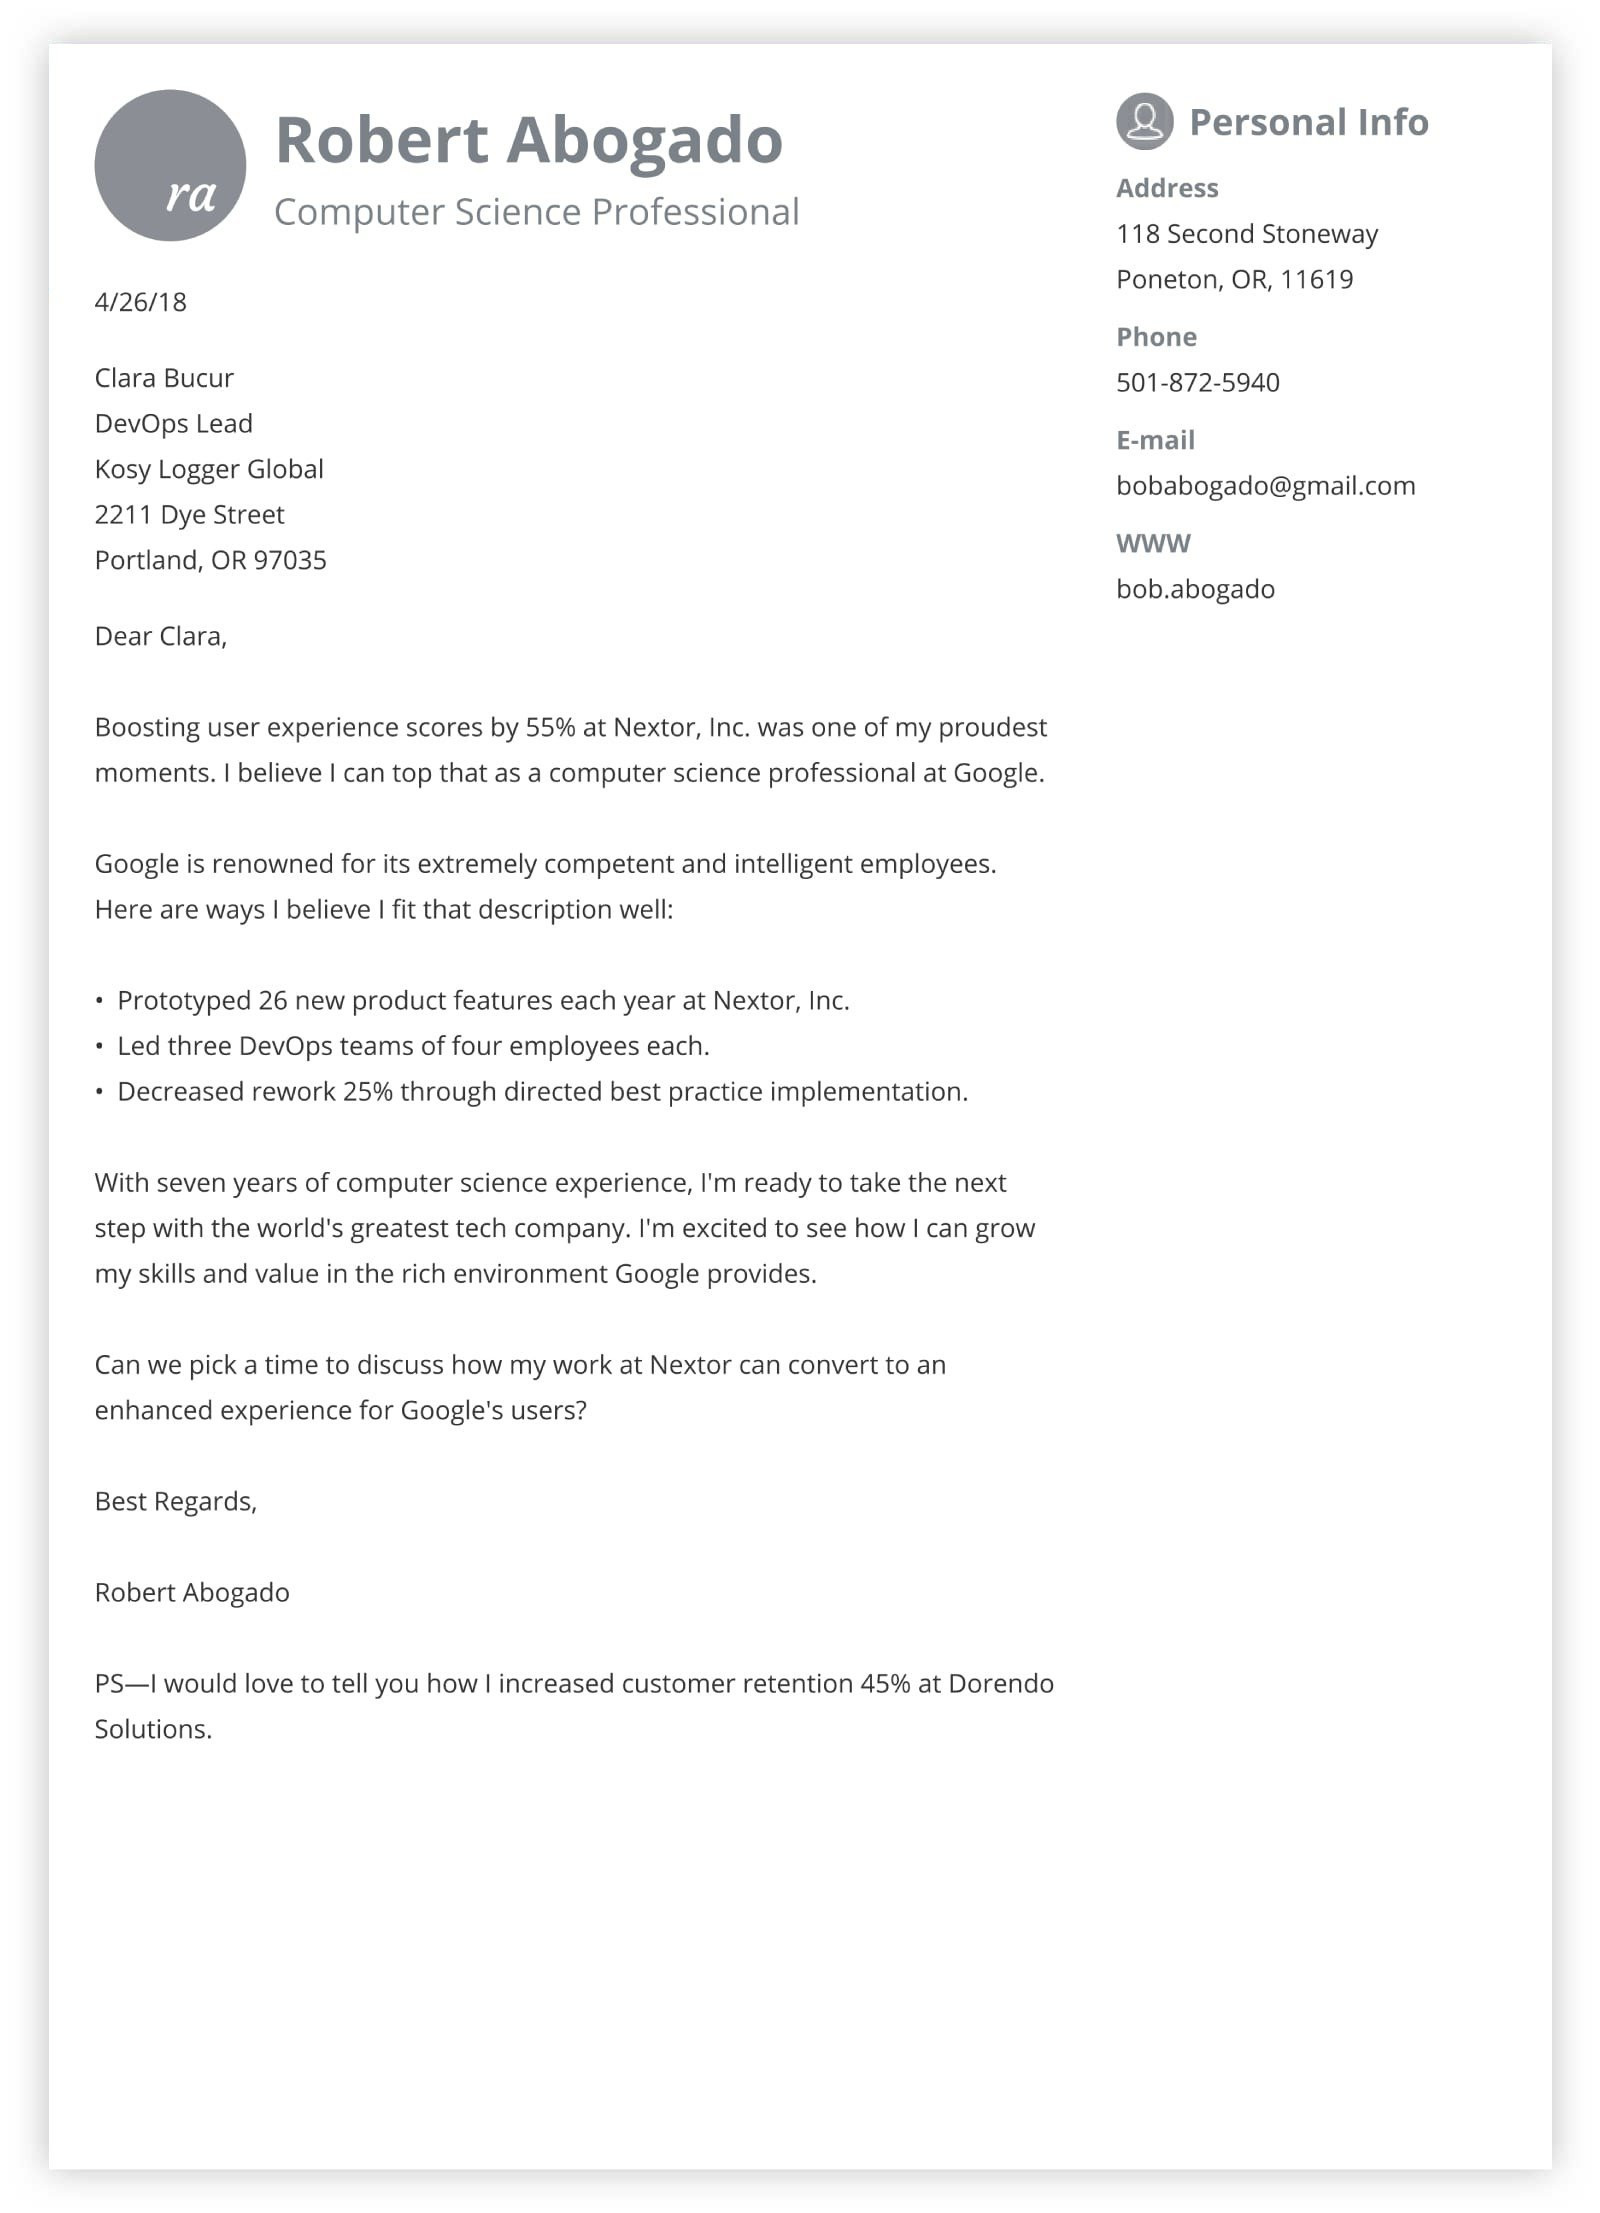 Create Cover Letter for Resume Sample How to Write A Cover Letter for Any Job In 8 Simple Steps